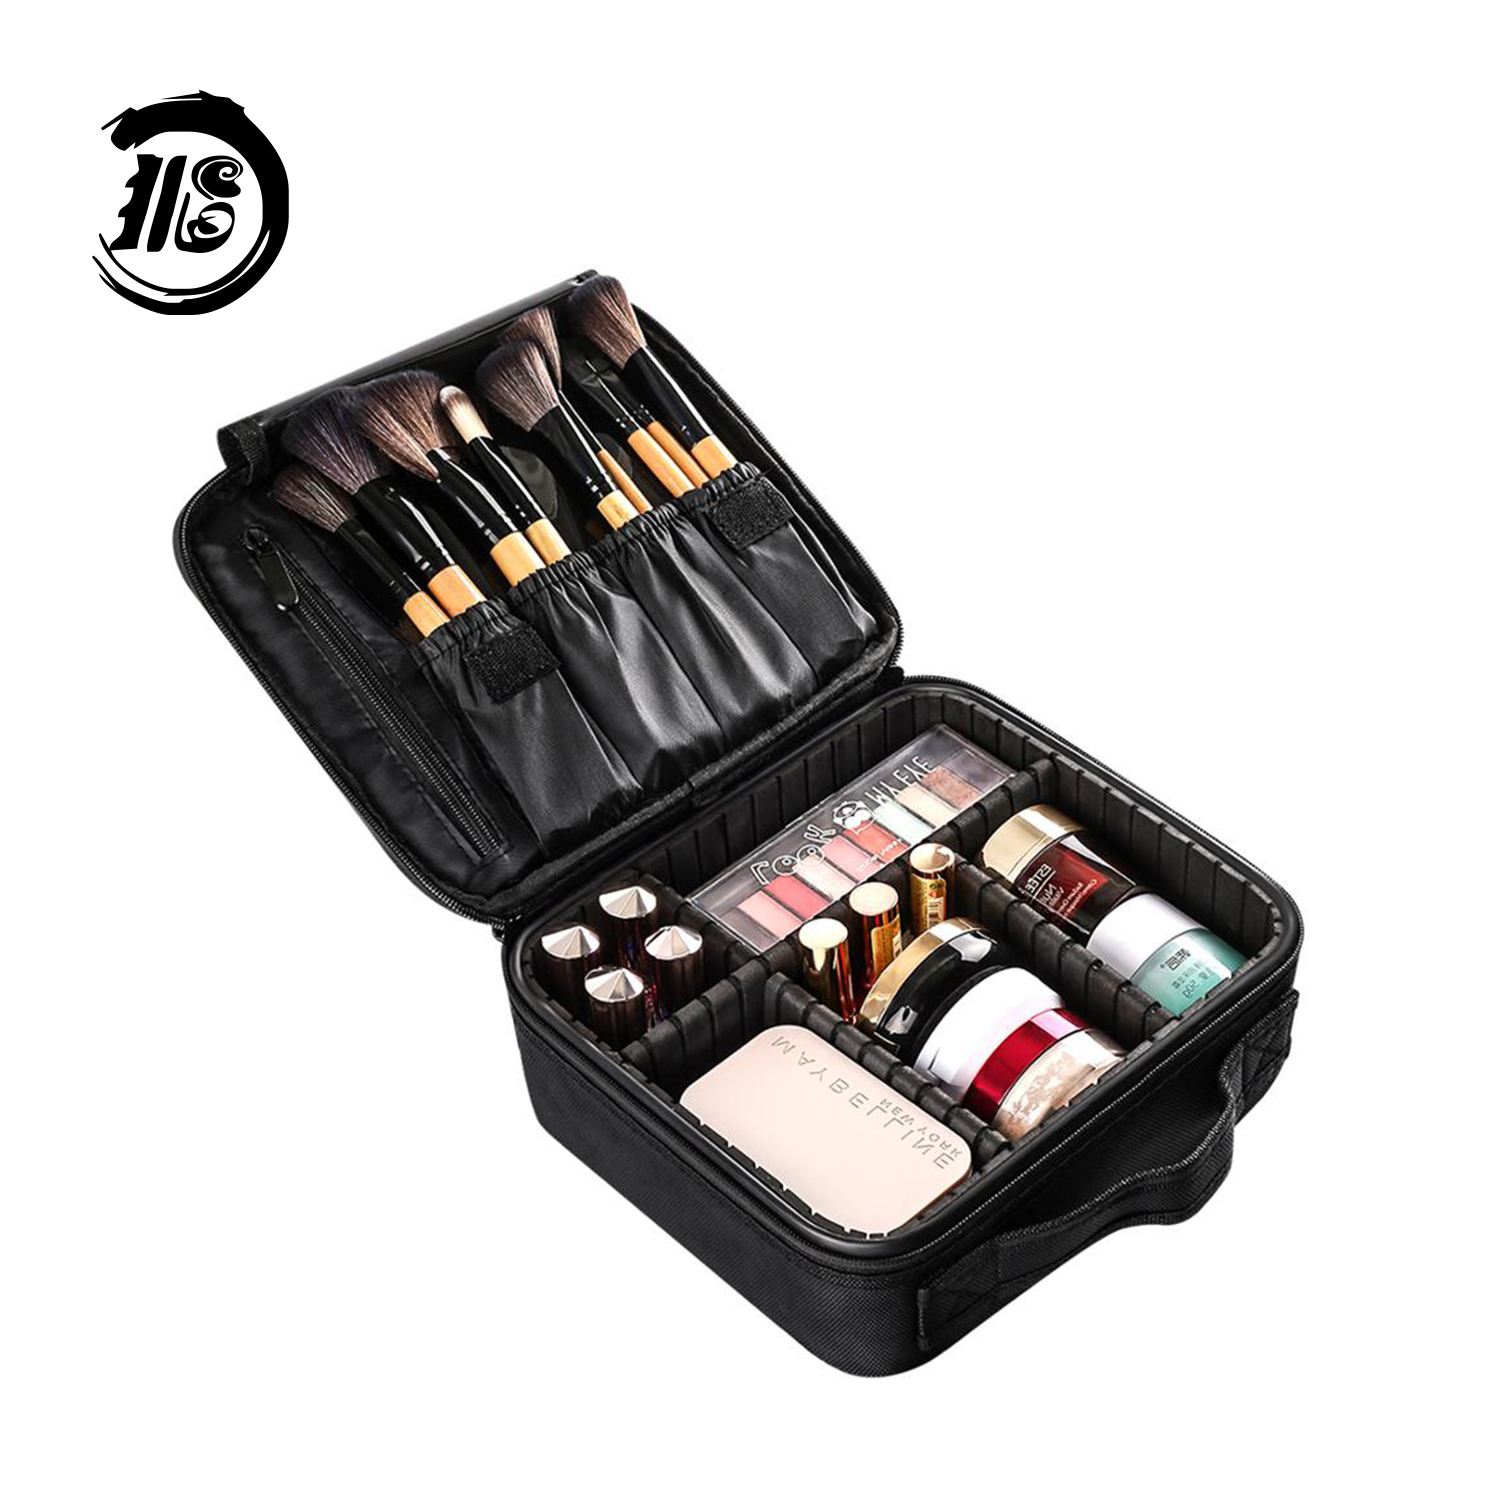 Makeup Bag Cosmetic Case Small Organizer Case with Adjustable EVA Dividers